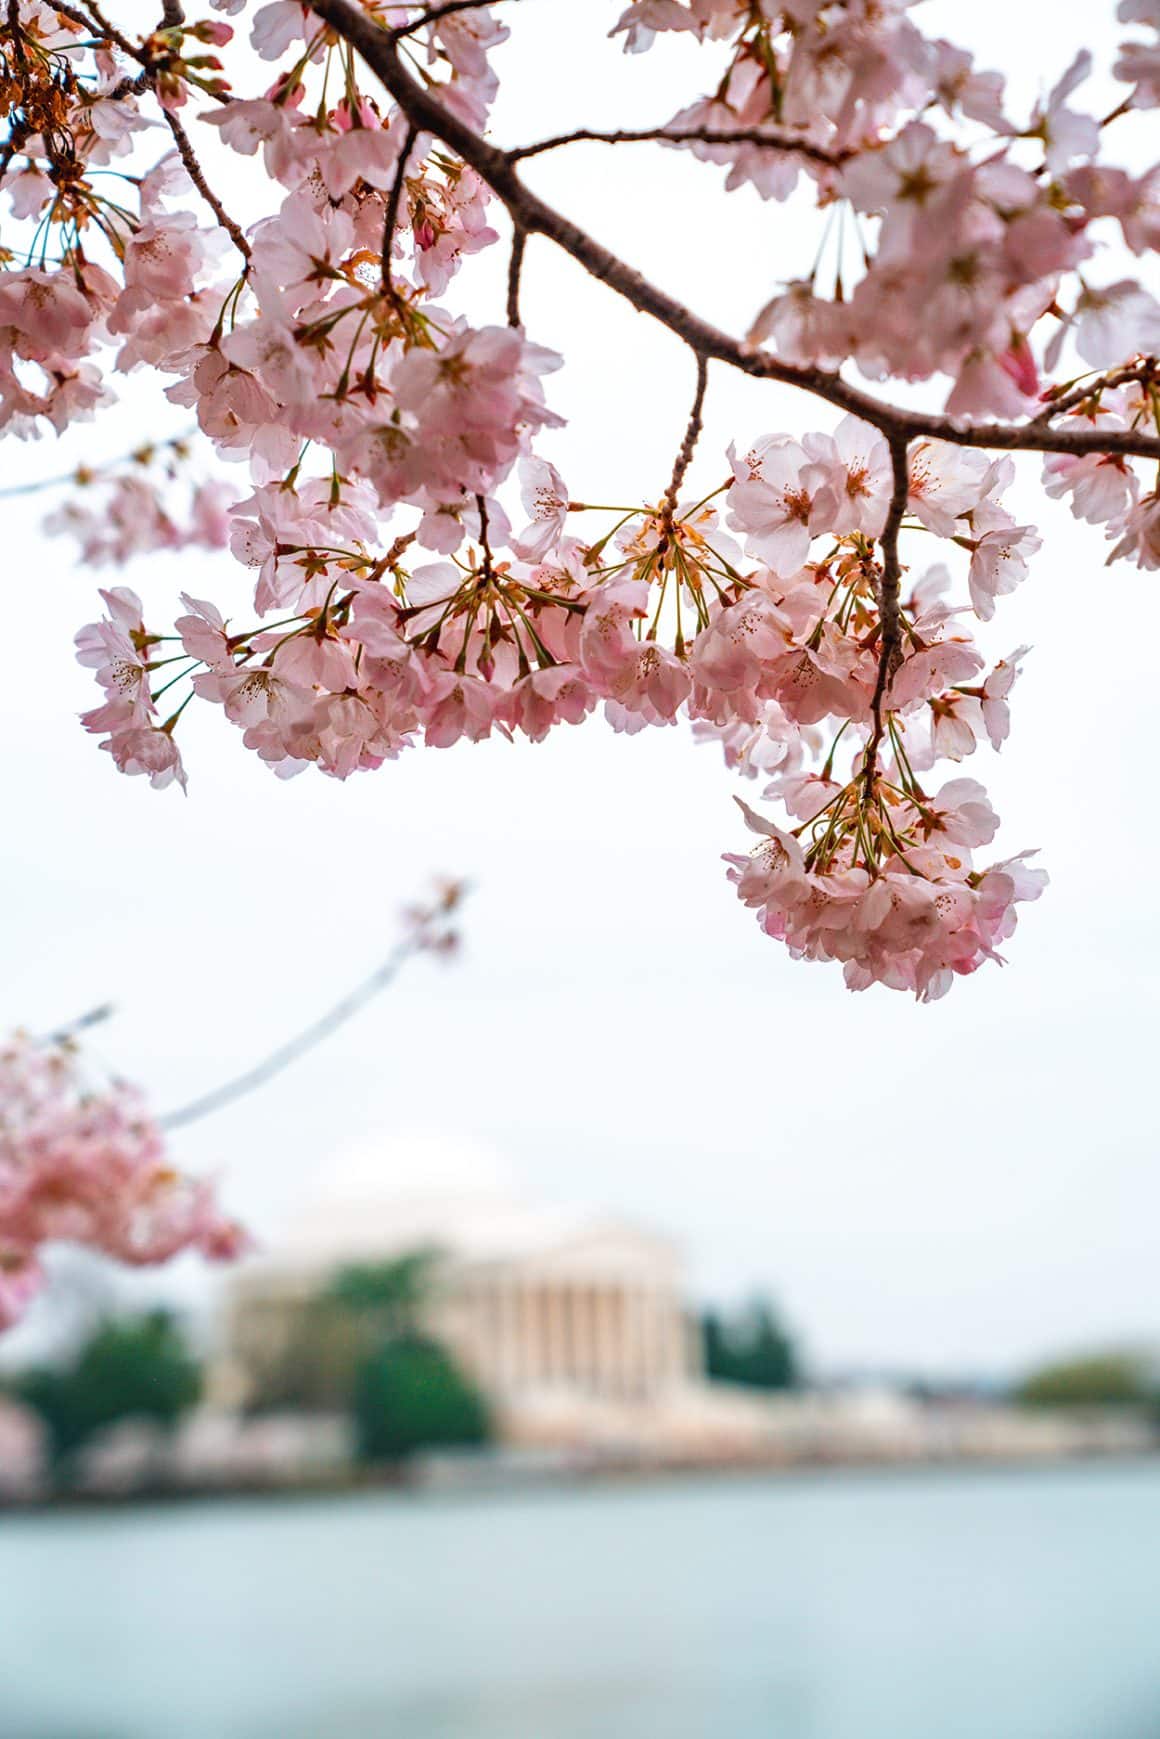 View of the Jefferson memorial through cherry blossoms in peak bloom- photo credit Keryn Means Twist Travel Magazine